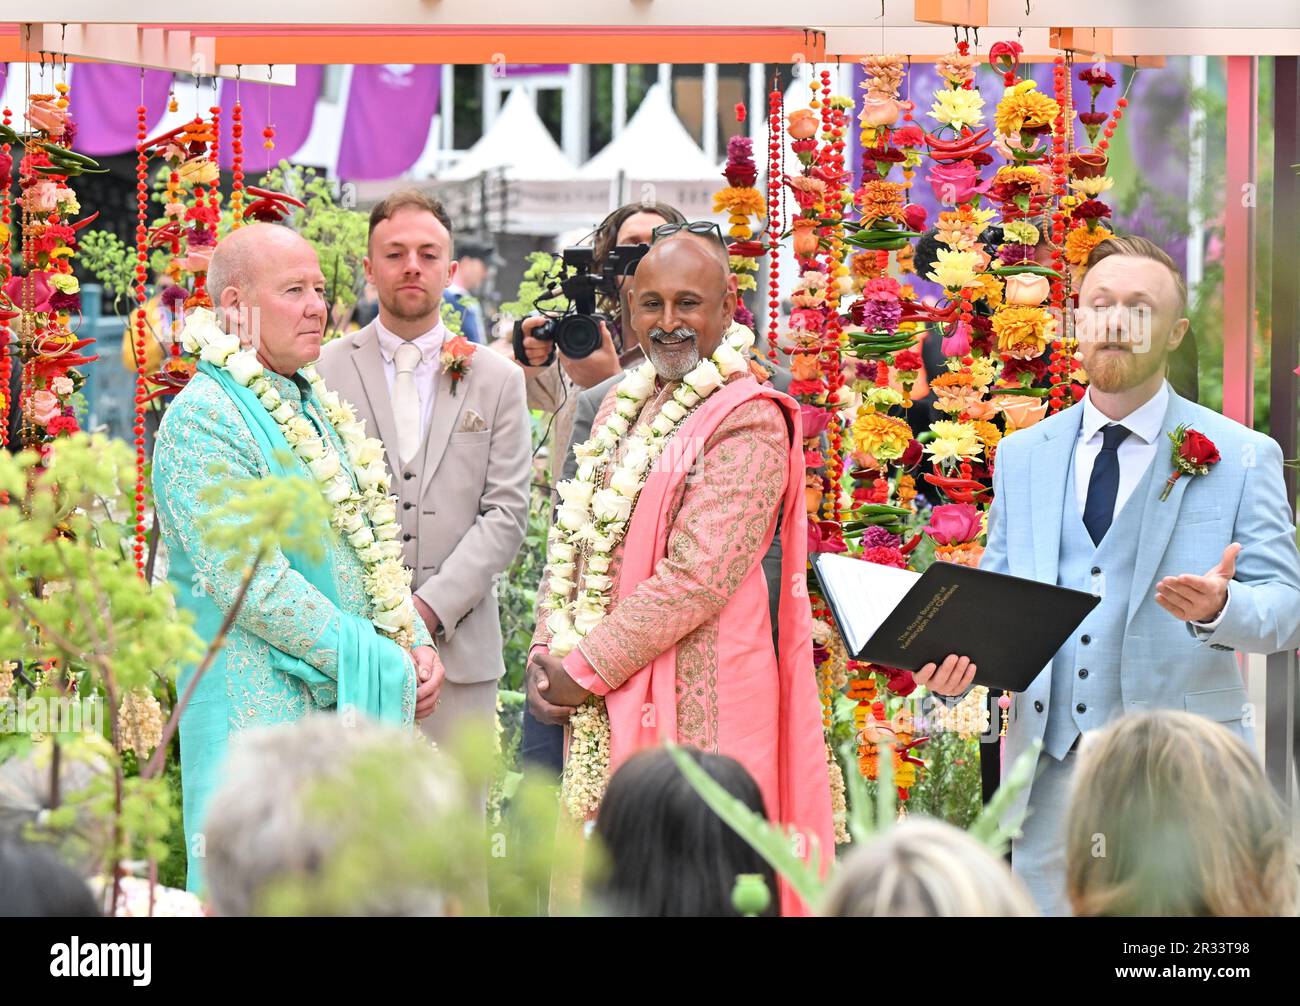 London, UK. 22nd May, 2023. Royal Hospital Chelsea, London, UK on May 22 2023. Newlyweds, Manoj Malde (R) and Clive Gillmor (L) celebrate tying the knot on the RHS and Eastern Eye Garden of Unity which hosted RHS Chelsea's first wedding.at the RHS Chelsea Flower Show at the Royal Hospital Chelsea, London, UK on May 22 2023. Credit: Francis Knight/Alamy Live News Stock Photo